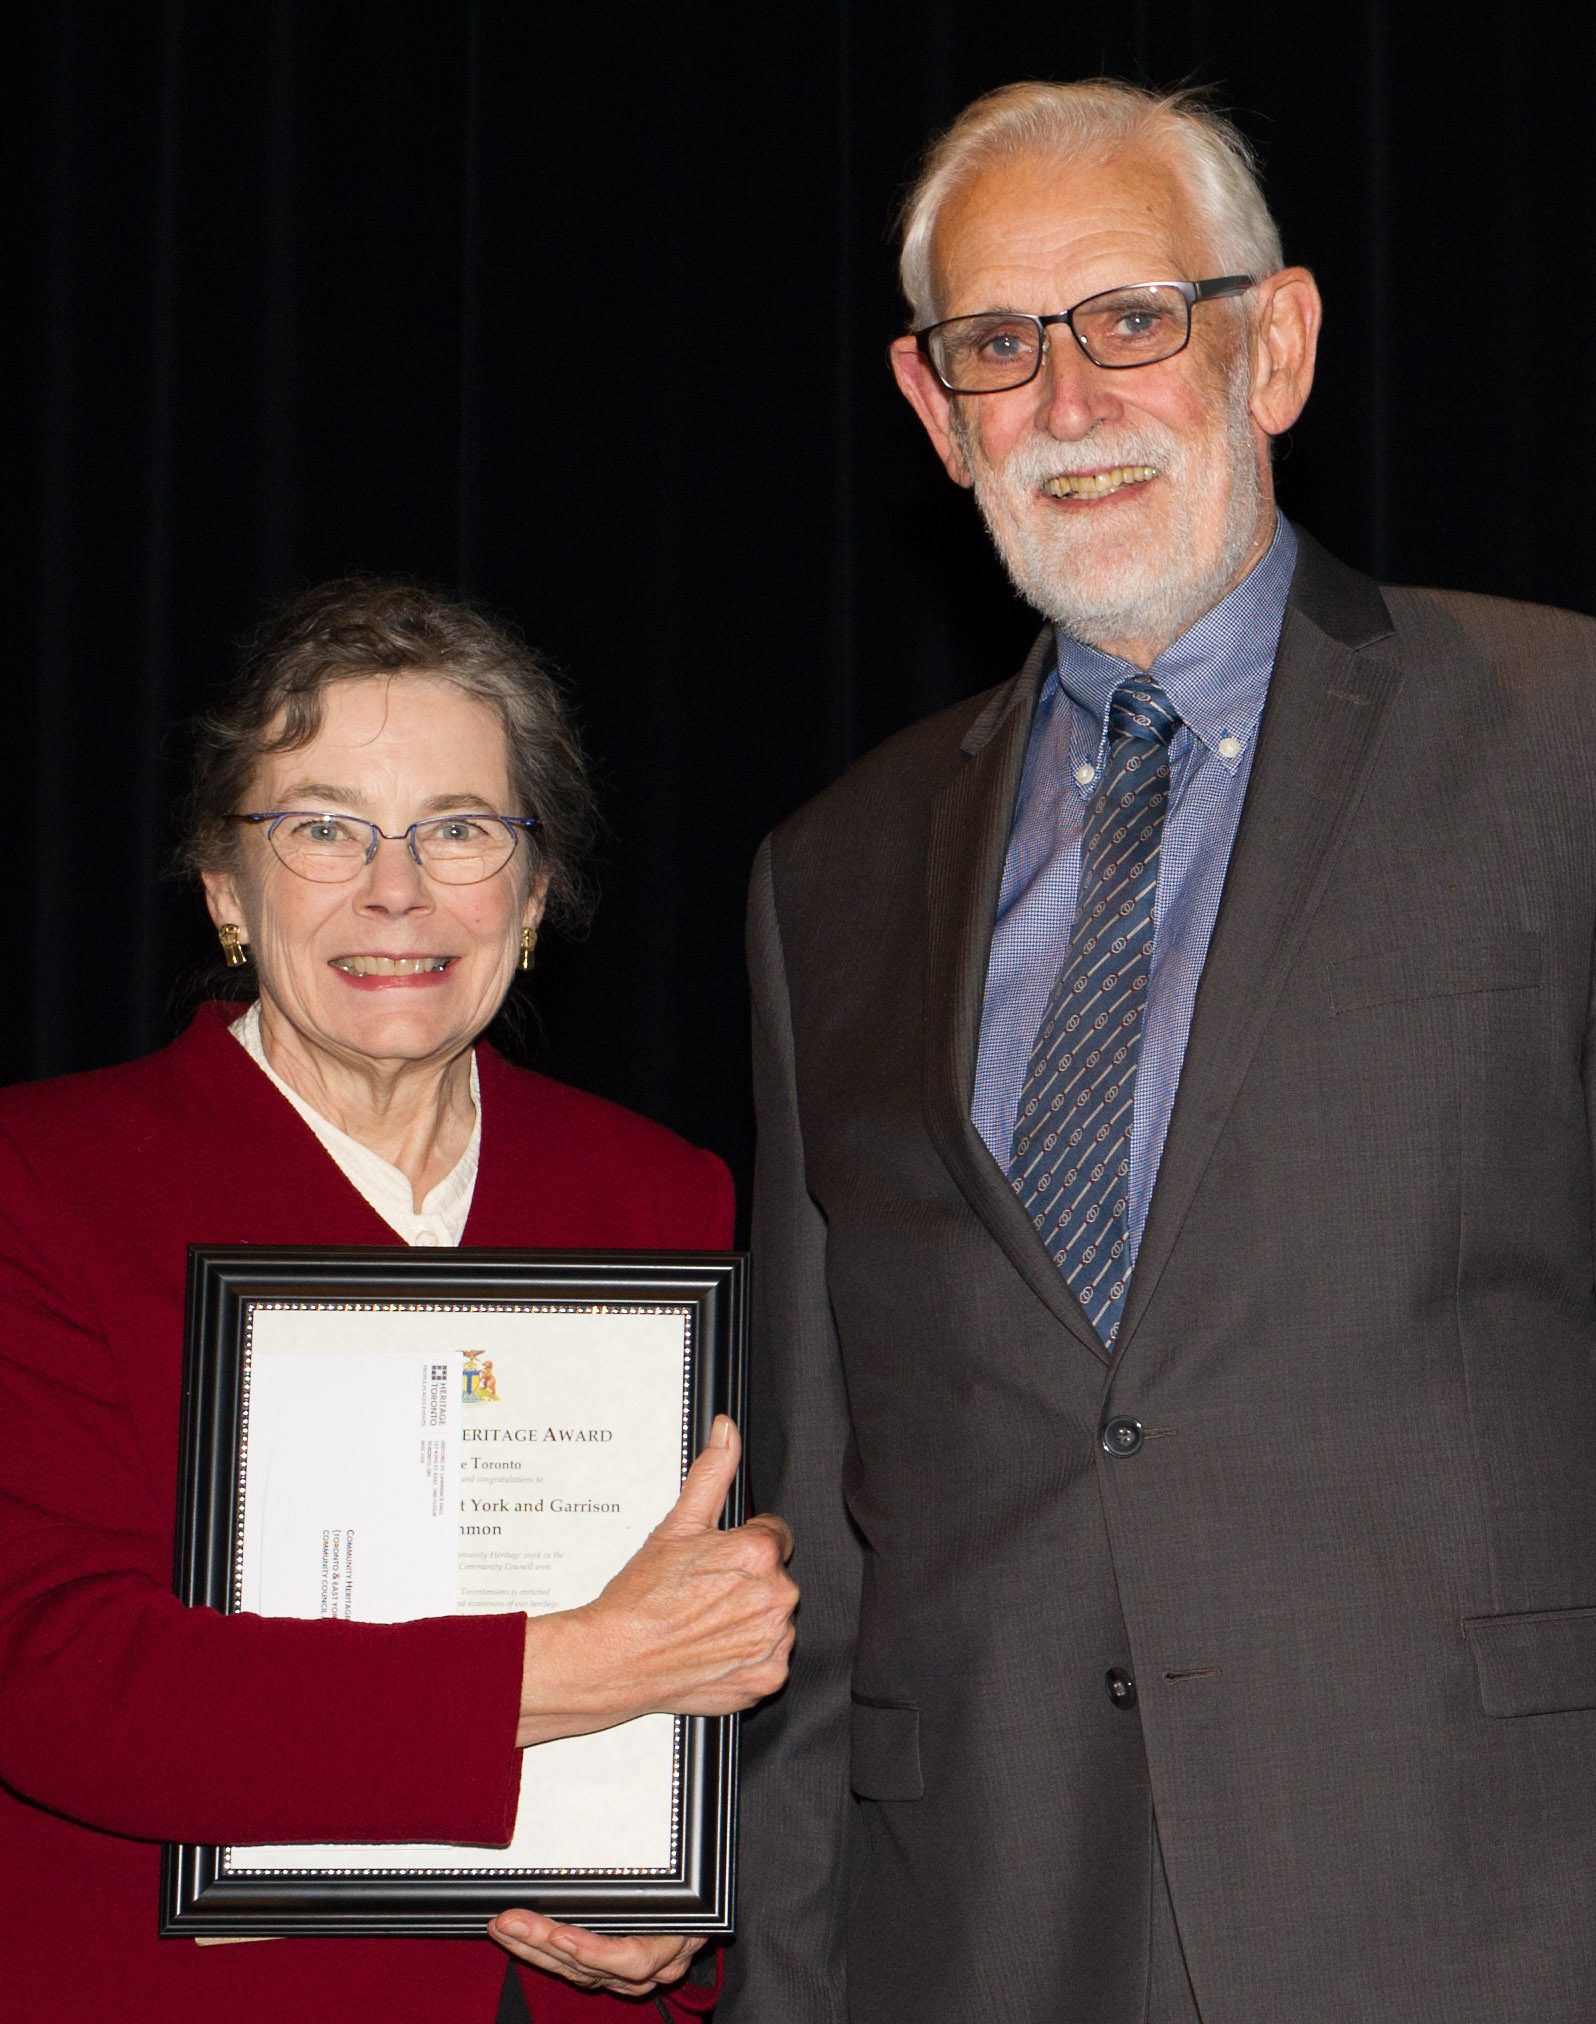 Patricia Fleming, editor of The Fife and Drum, and Joe Gill, past chair of the Friends of Fort York who founded the newsletter in 1998, took to the stage to receive our Community Heritage Award. Credit: Heritage Toronto